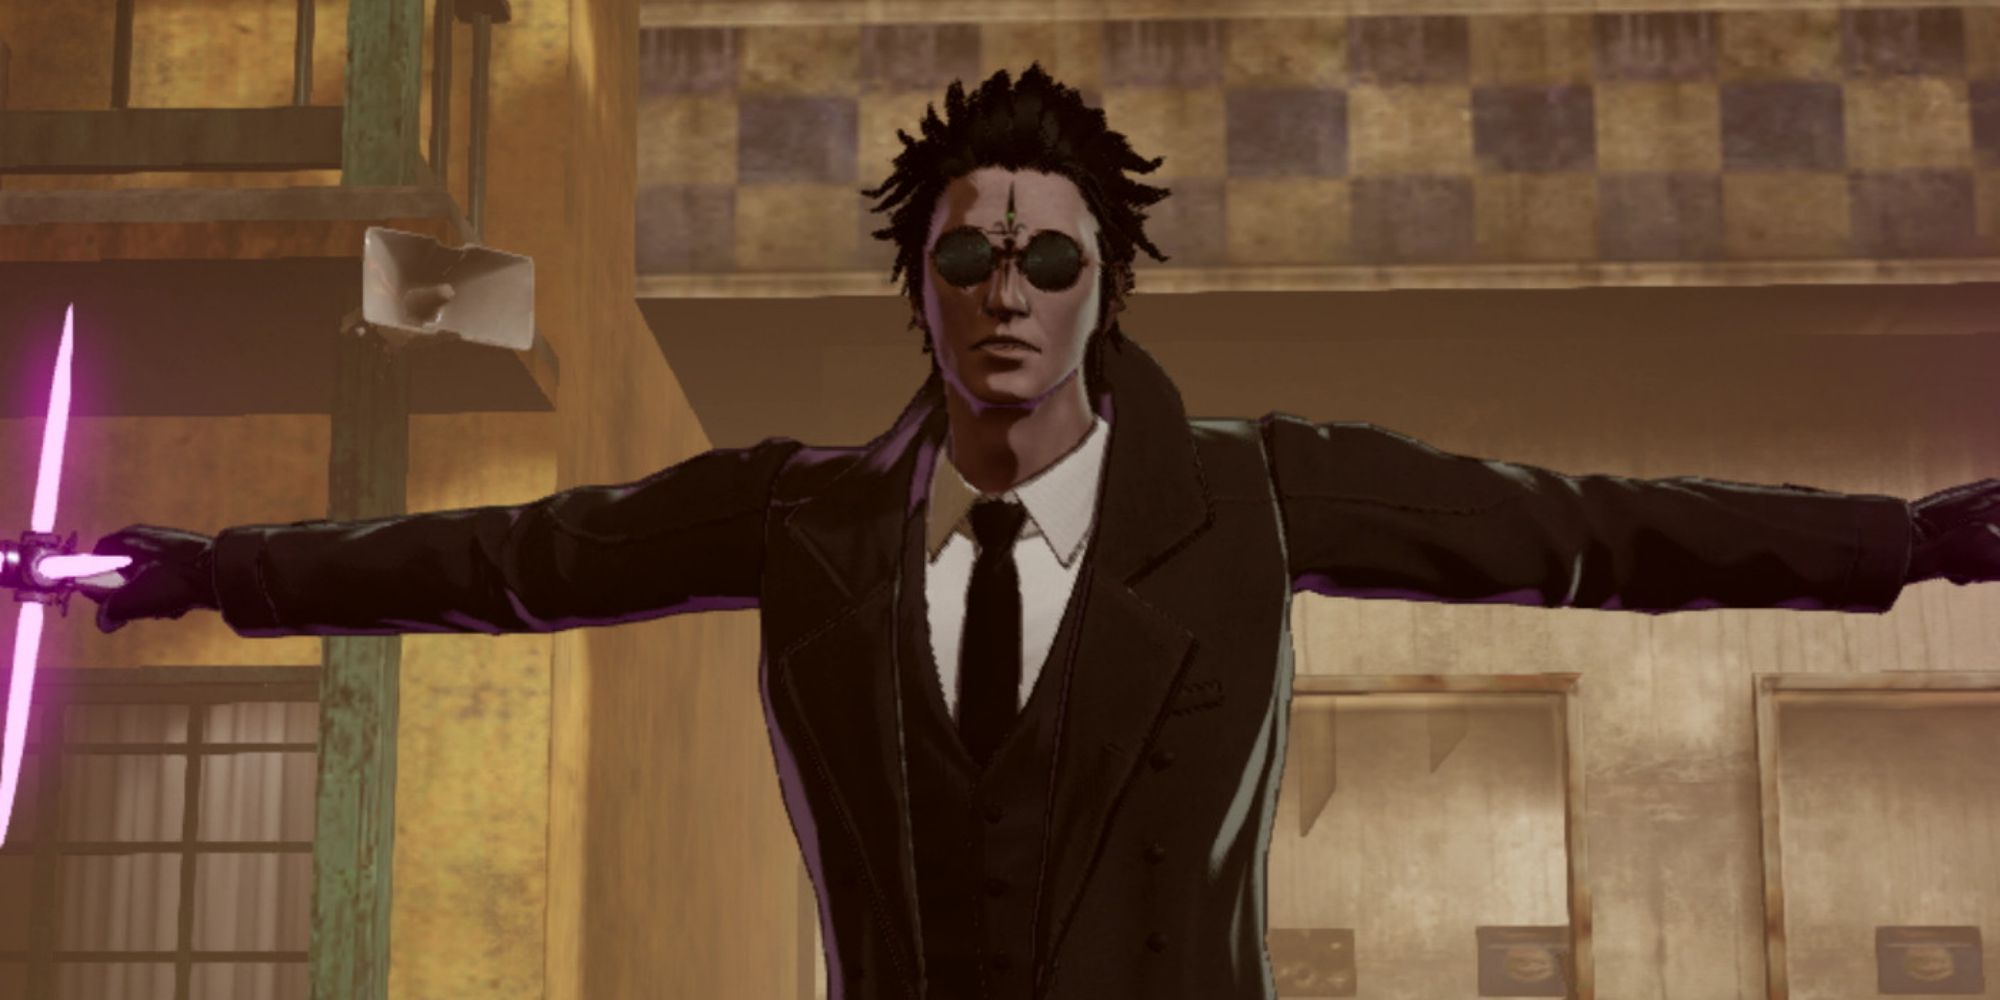 The character Henry Cooldown brandishes his weapon in No More Heroes 3